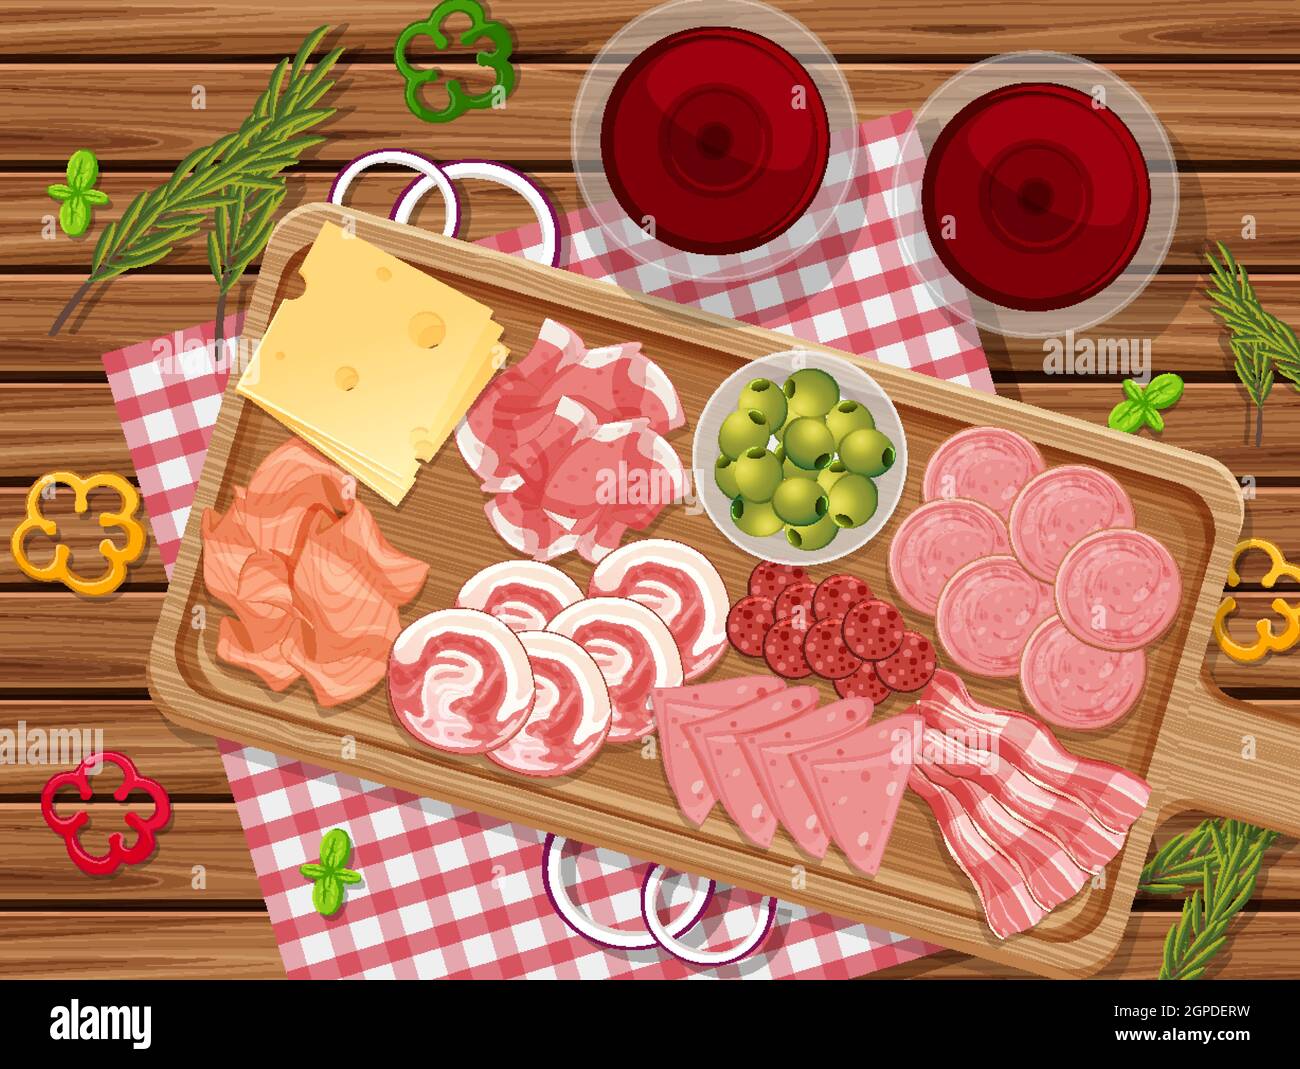 Platter of cold meats and smoked meat on the table background illustration Stock Vector